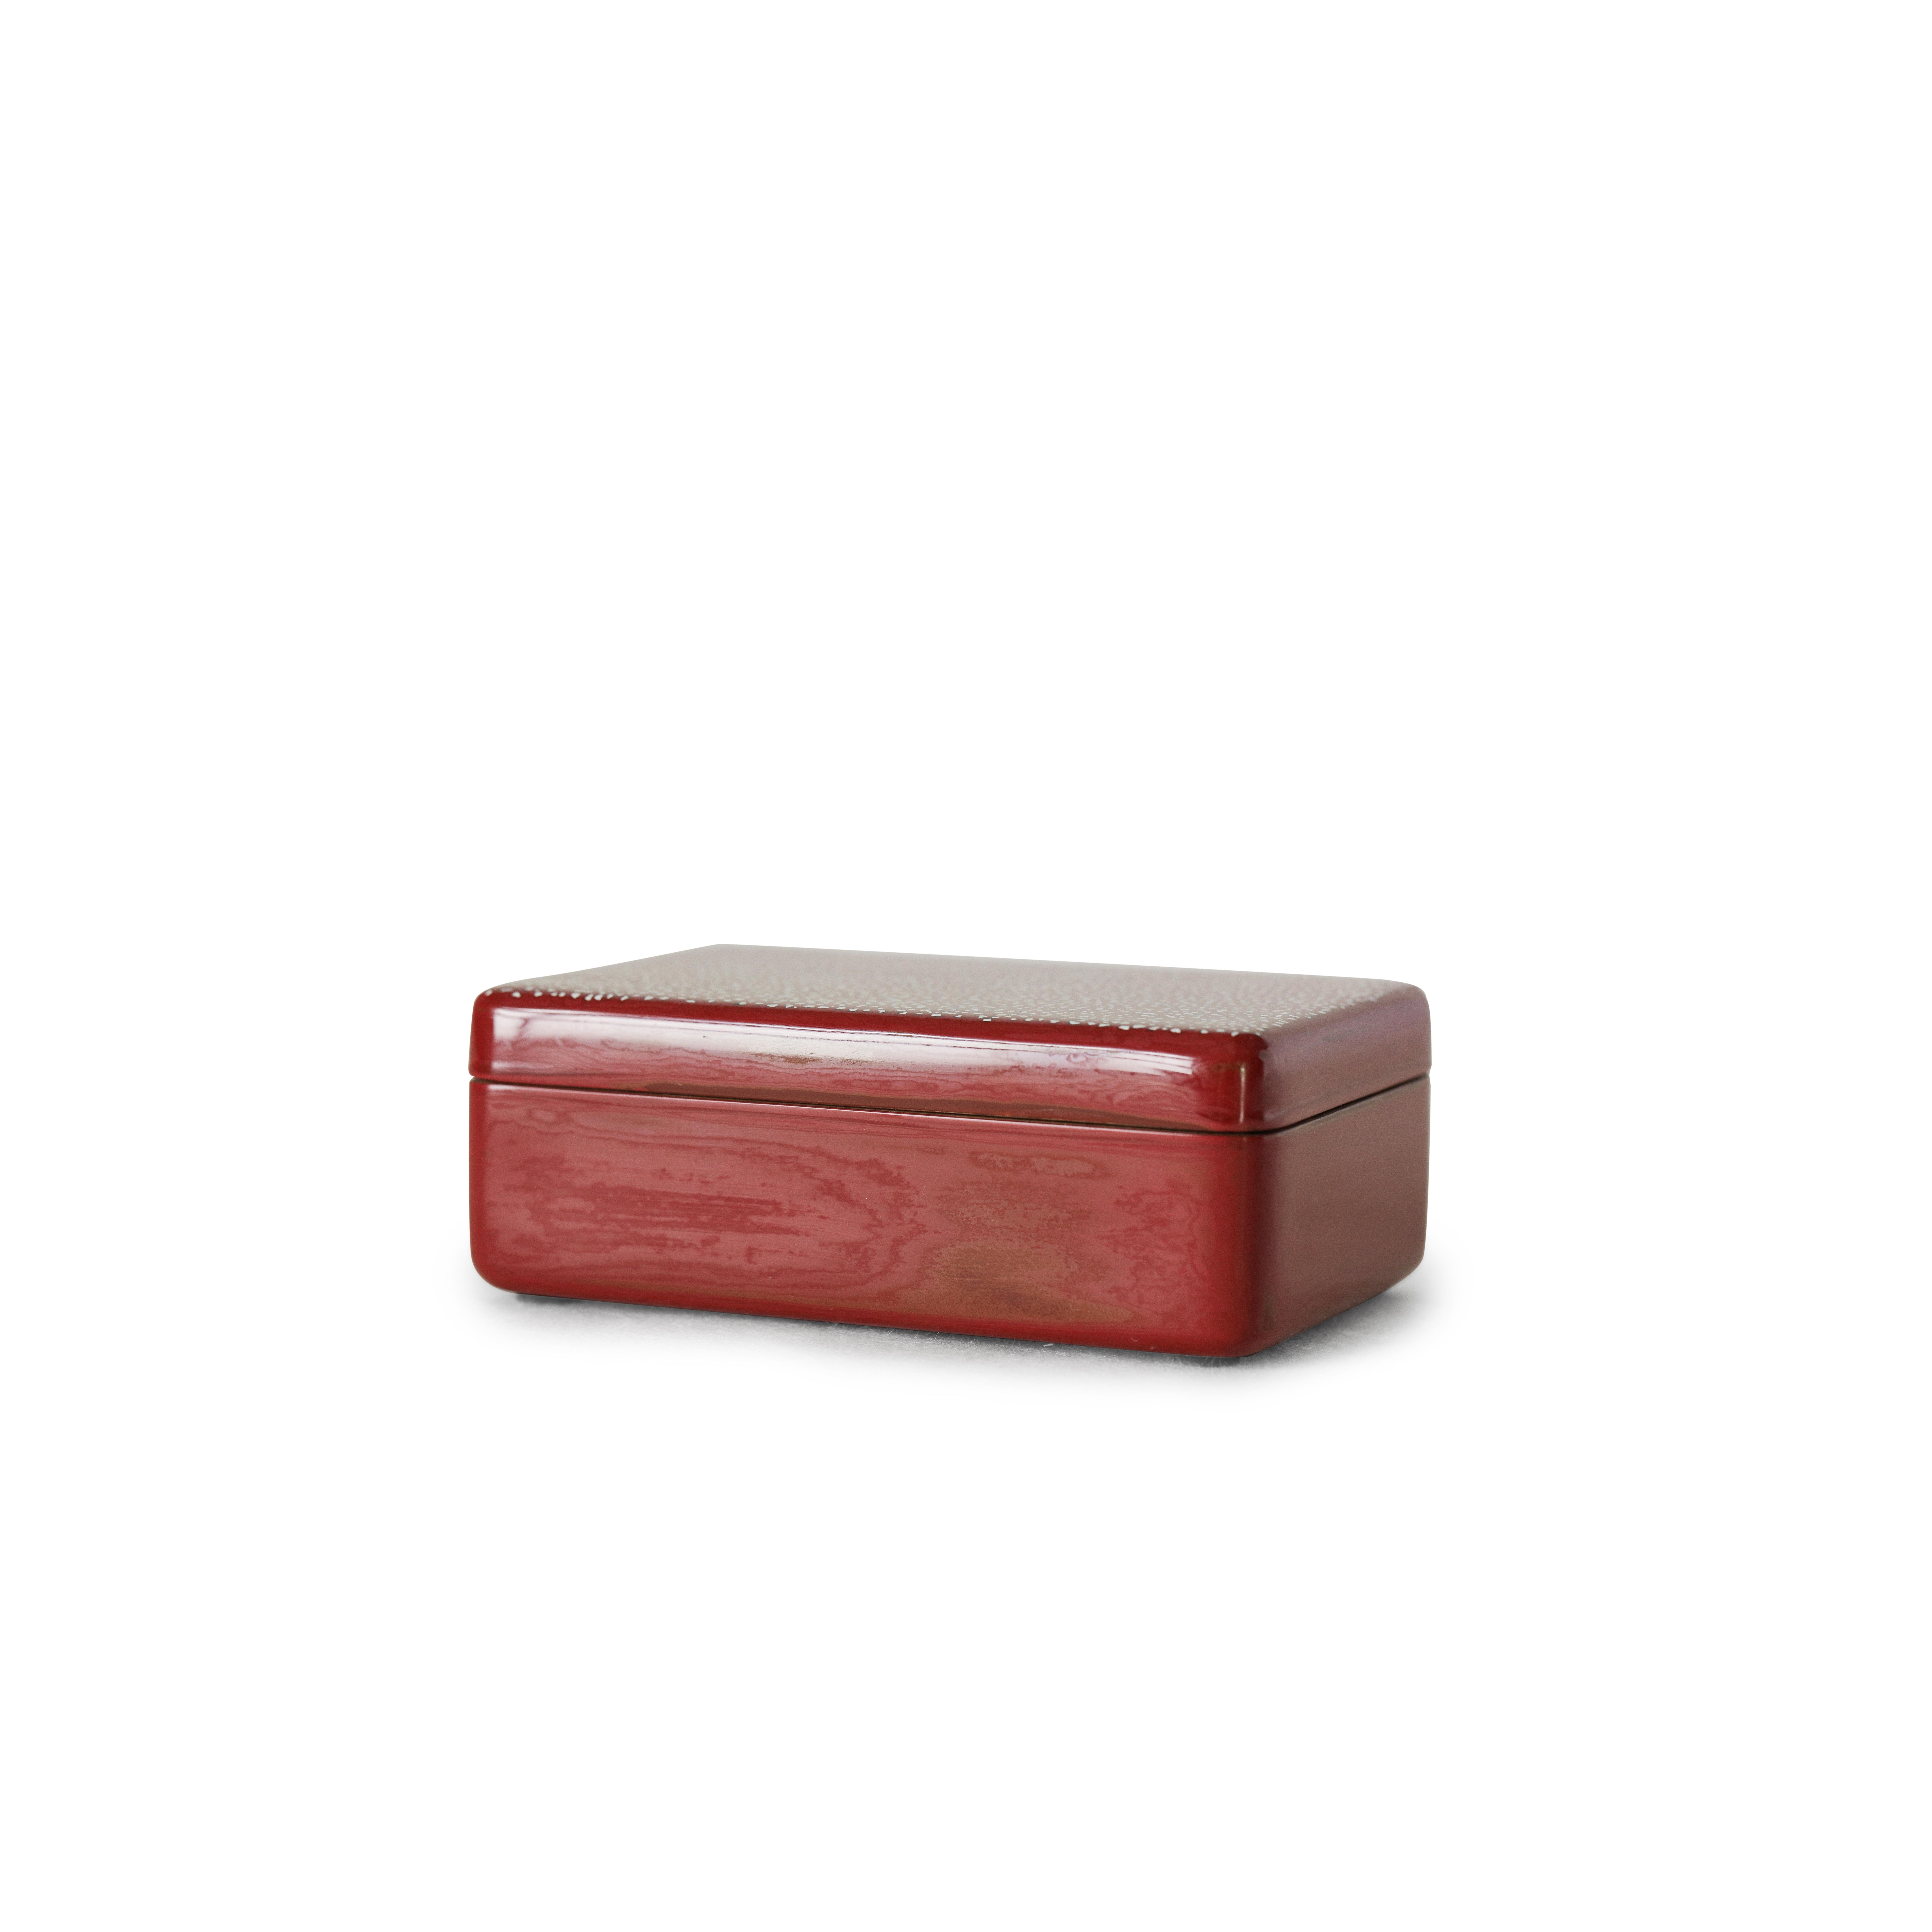 Hand-Crafted Urushi Natural Red Lacquer Allsorts Box - Small by Alexander Lamont For Sale